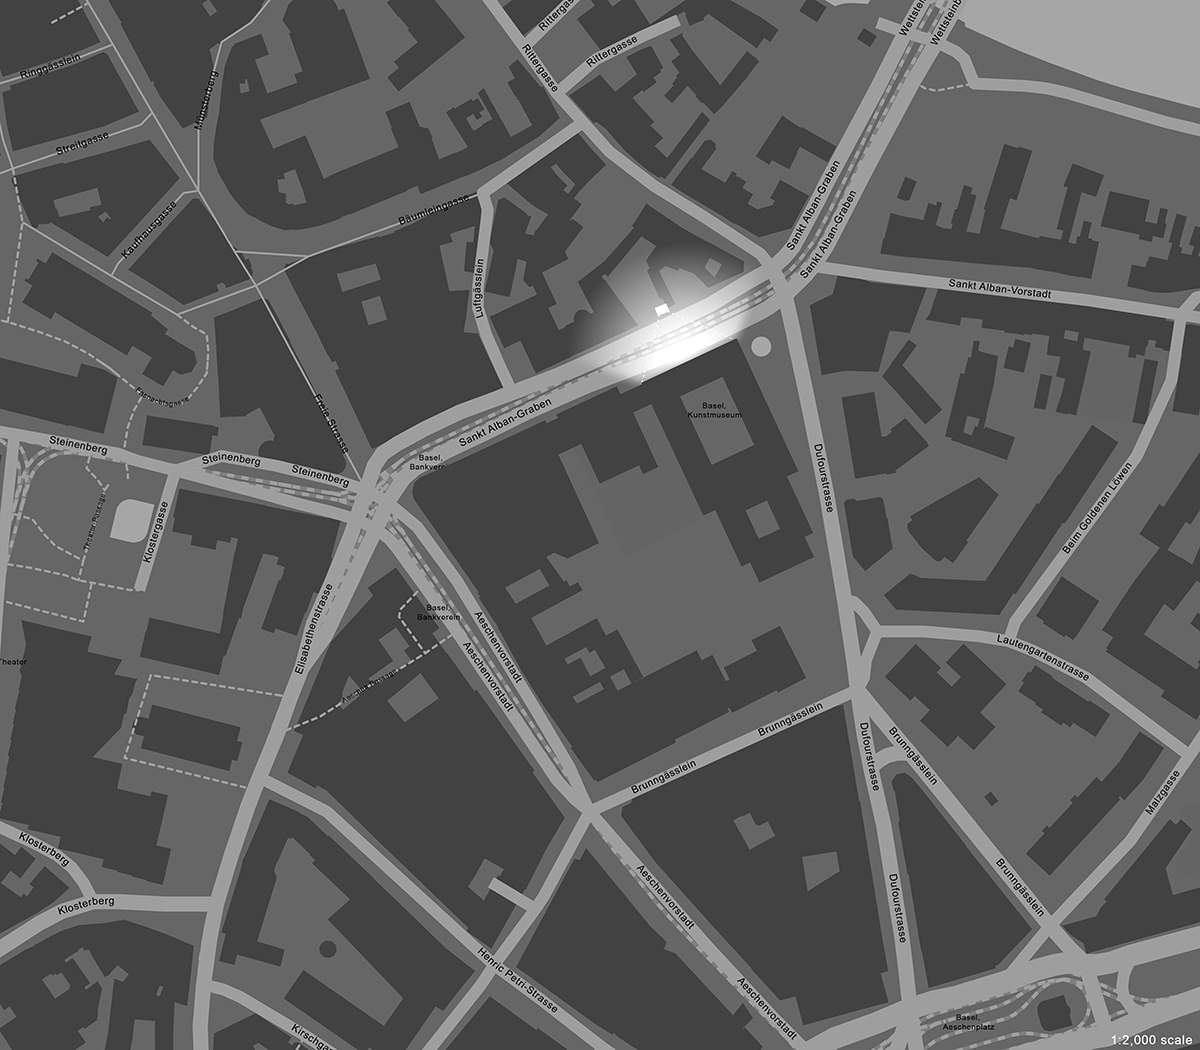 Aerial map of a section of Basel Switzerland showing the location of the Kunstmuseum on Sankt Alban-Graben, The street on the northern side of the Kunstmuseum is highlighted to show the area of the projection.